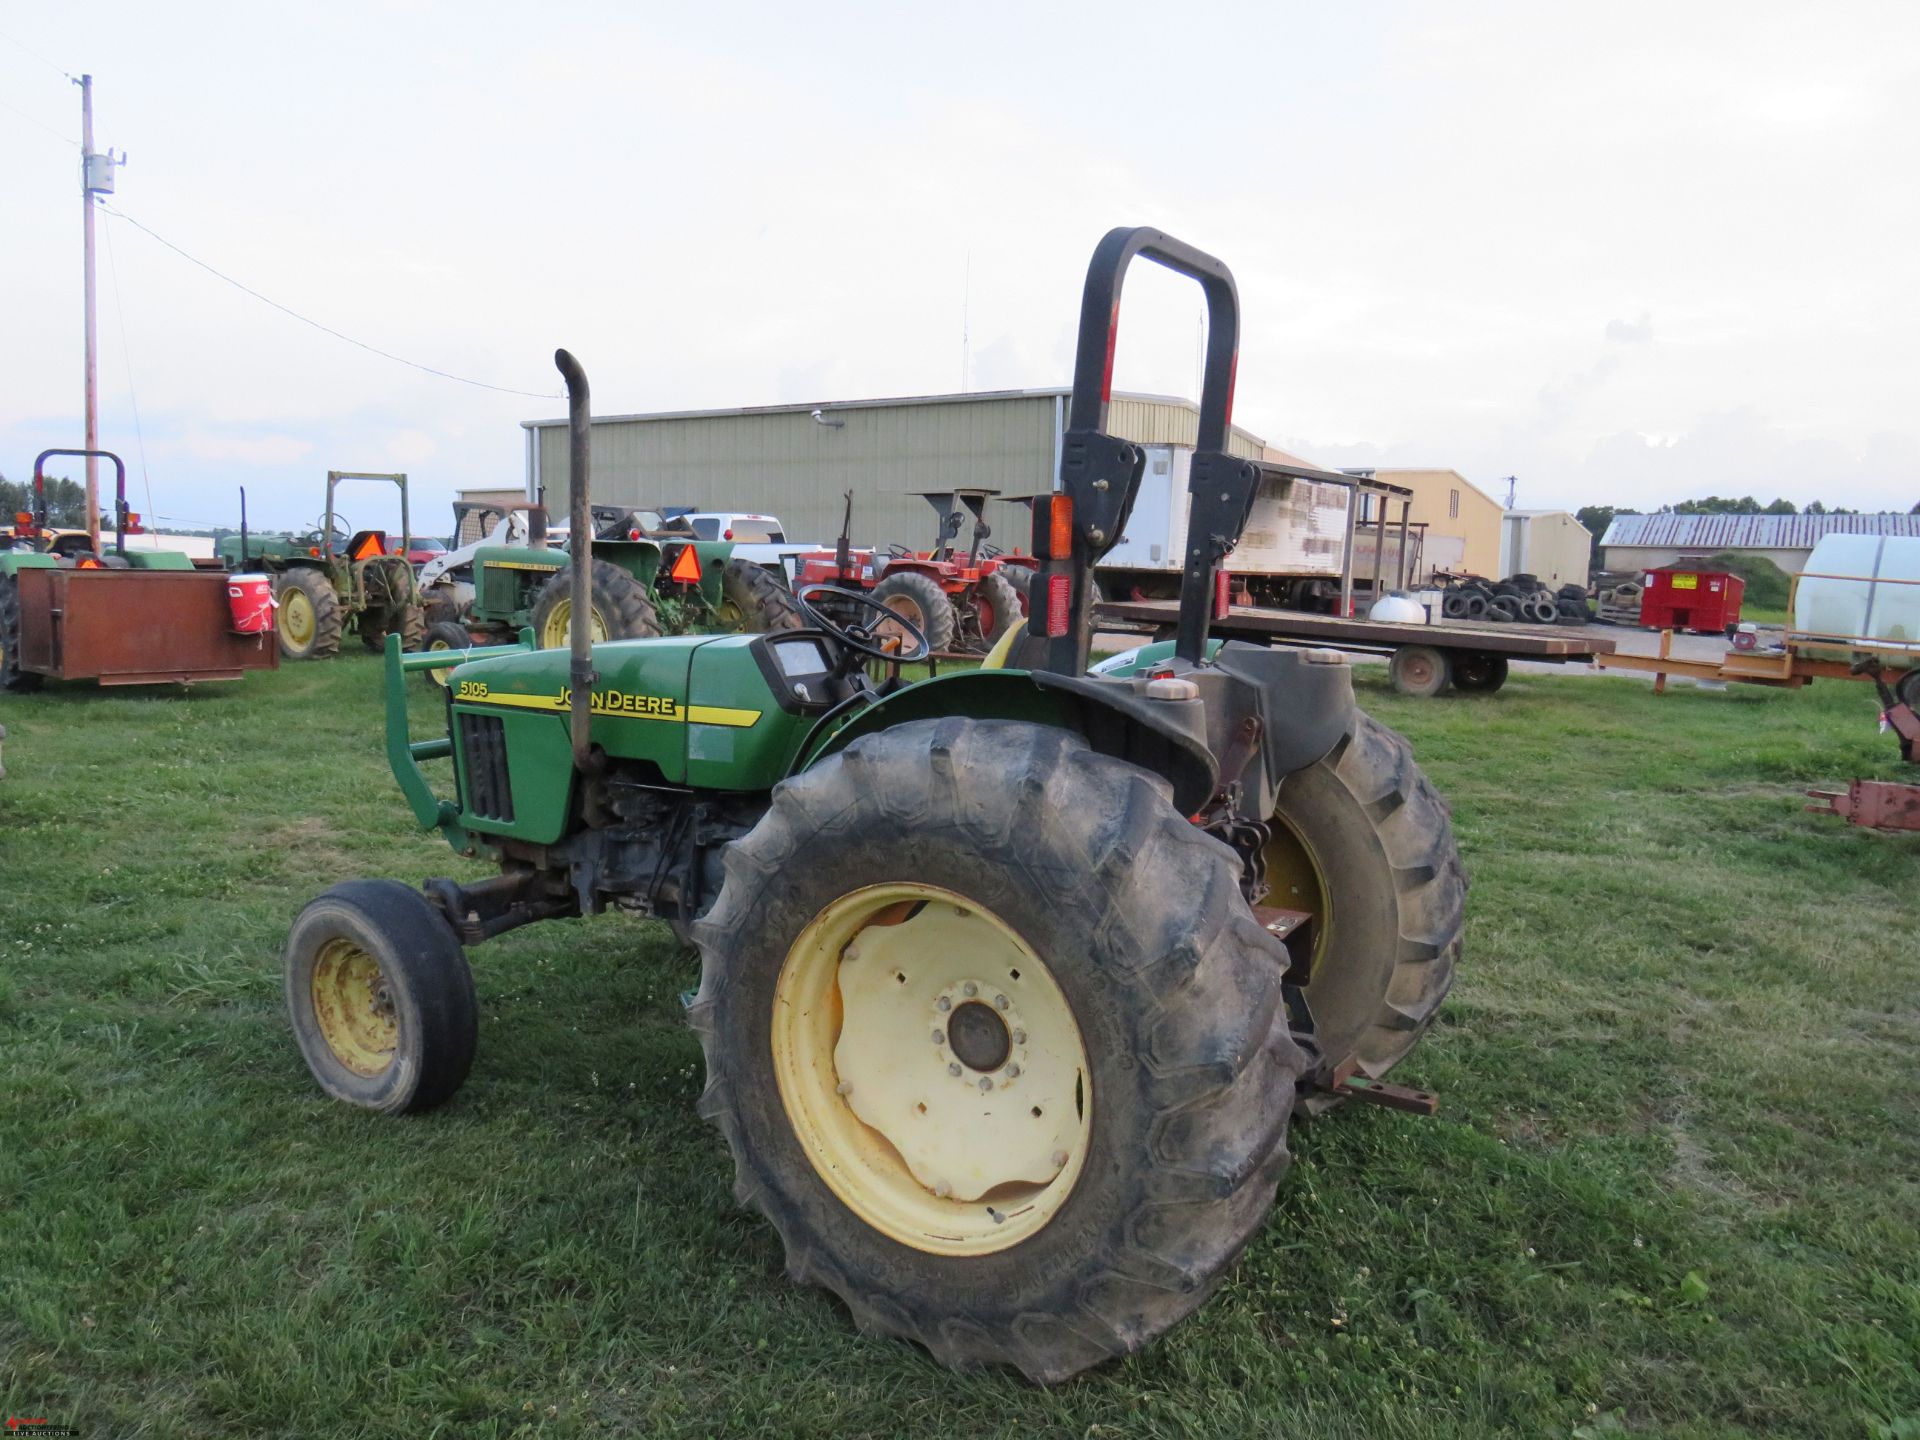 2004 JOHN DEERE 5105 TRACTOR, PTO, 16.9-28 REAR TIRES, 4178 HOURS SHOWING (HOURS SUBJECT TO CHANGE), - Image 4 of 7